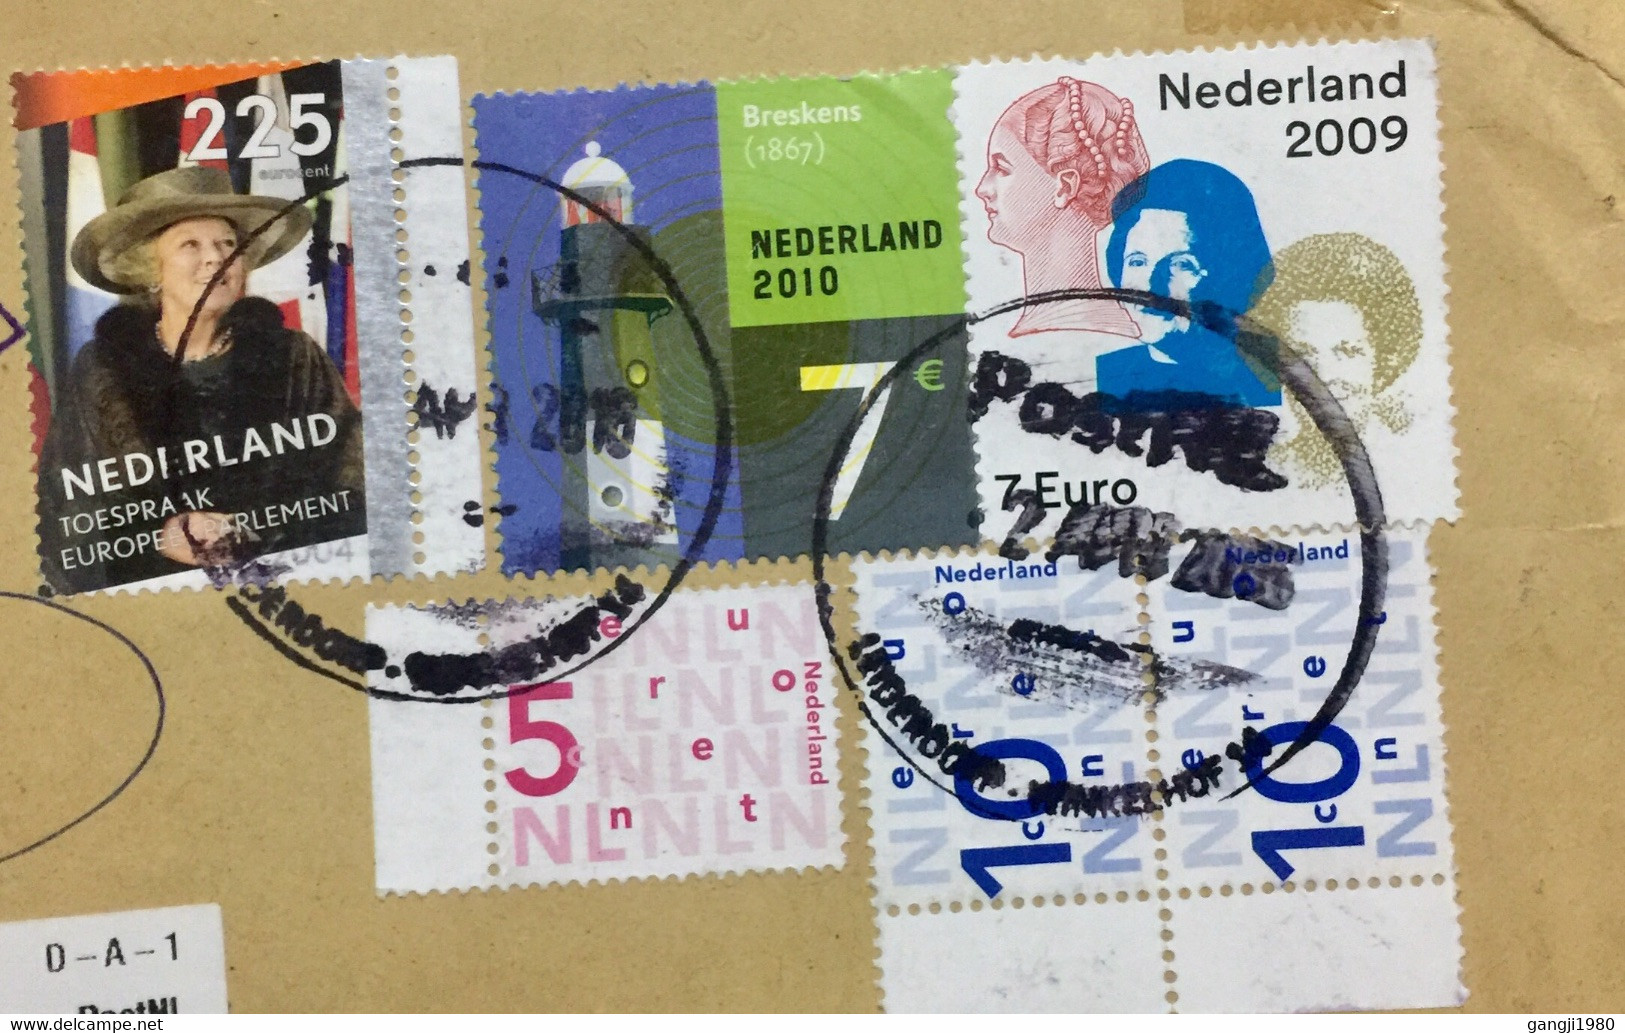 NEDERLAND 2016, REGISTERED VIGNETTE CUSTOME DECLARATION AIRMAIL LABEL 16.50€ STAMPS USED COVER TO INDIA, LEIDERDORP - Covers & Documents